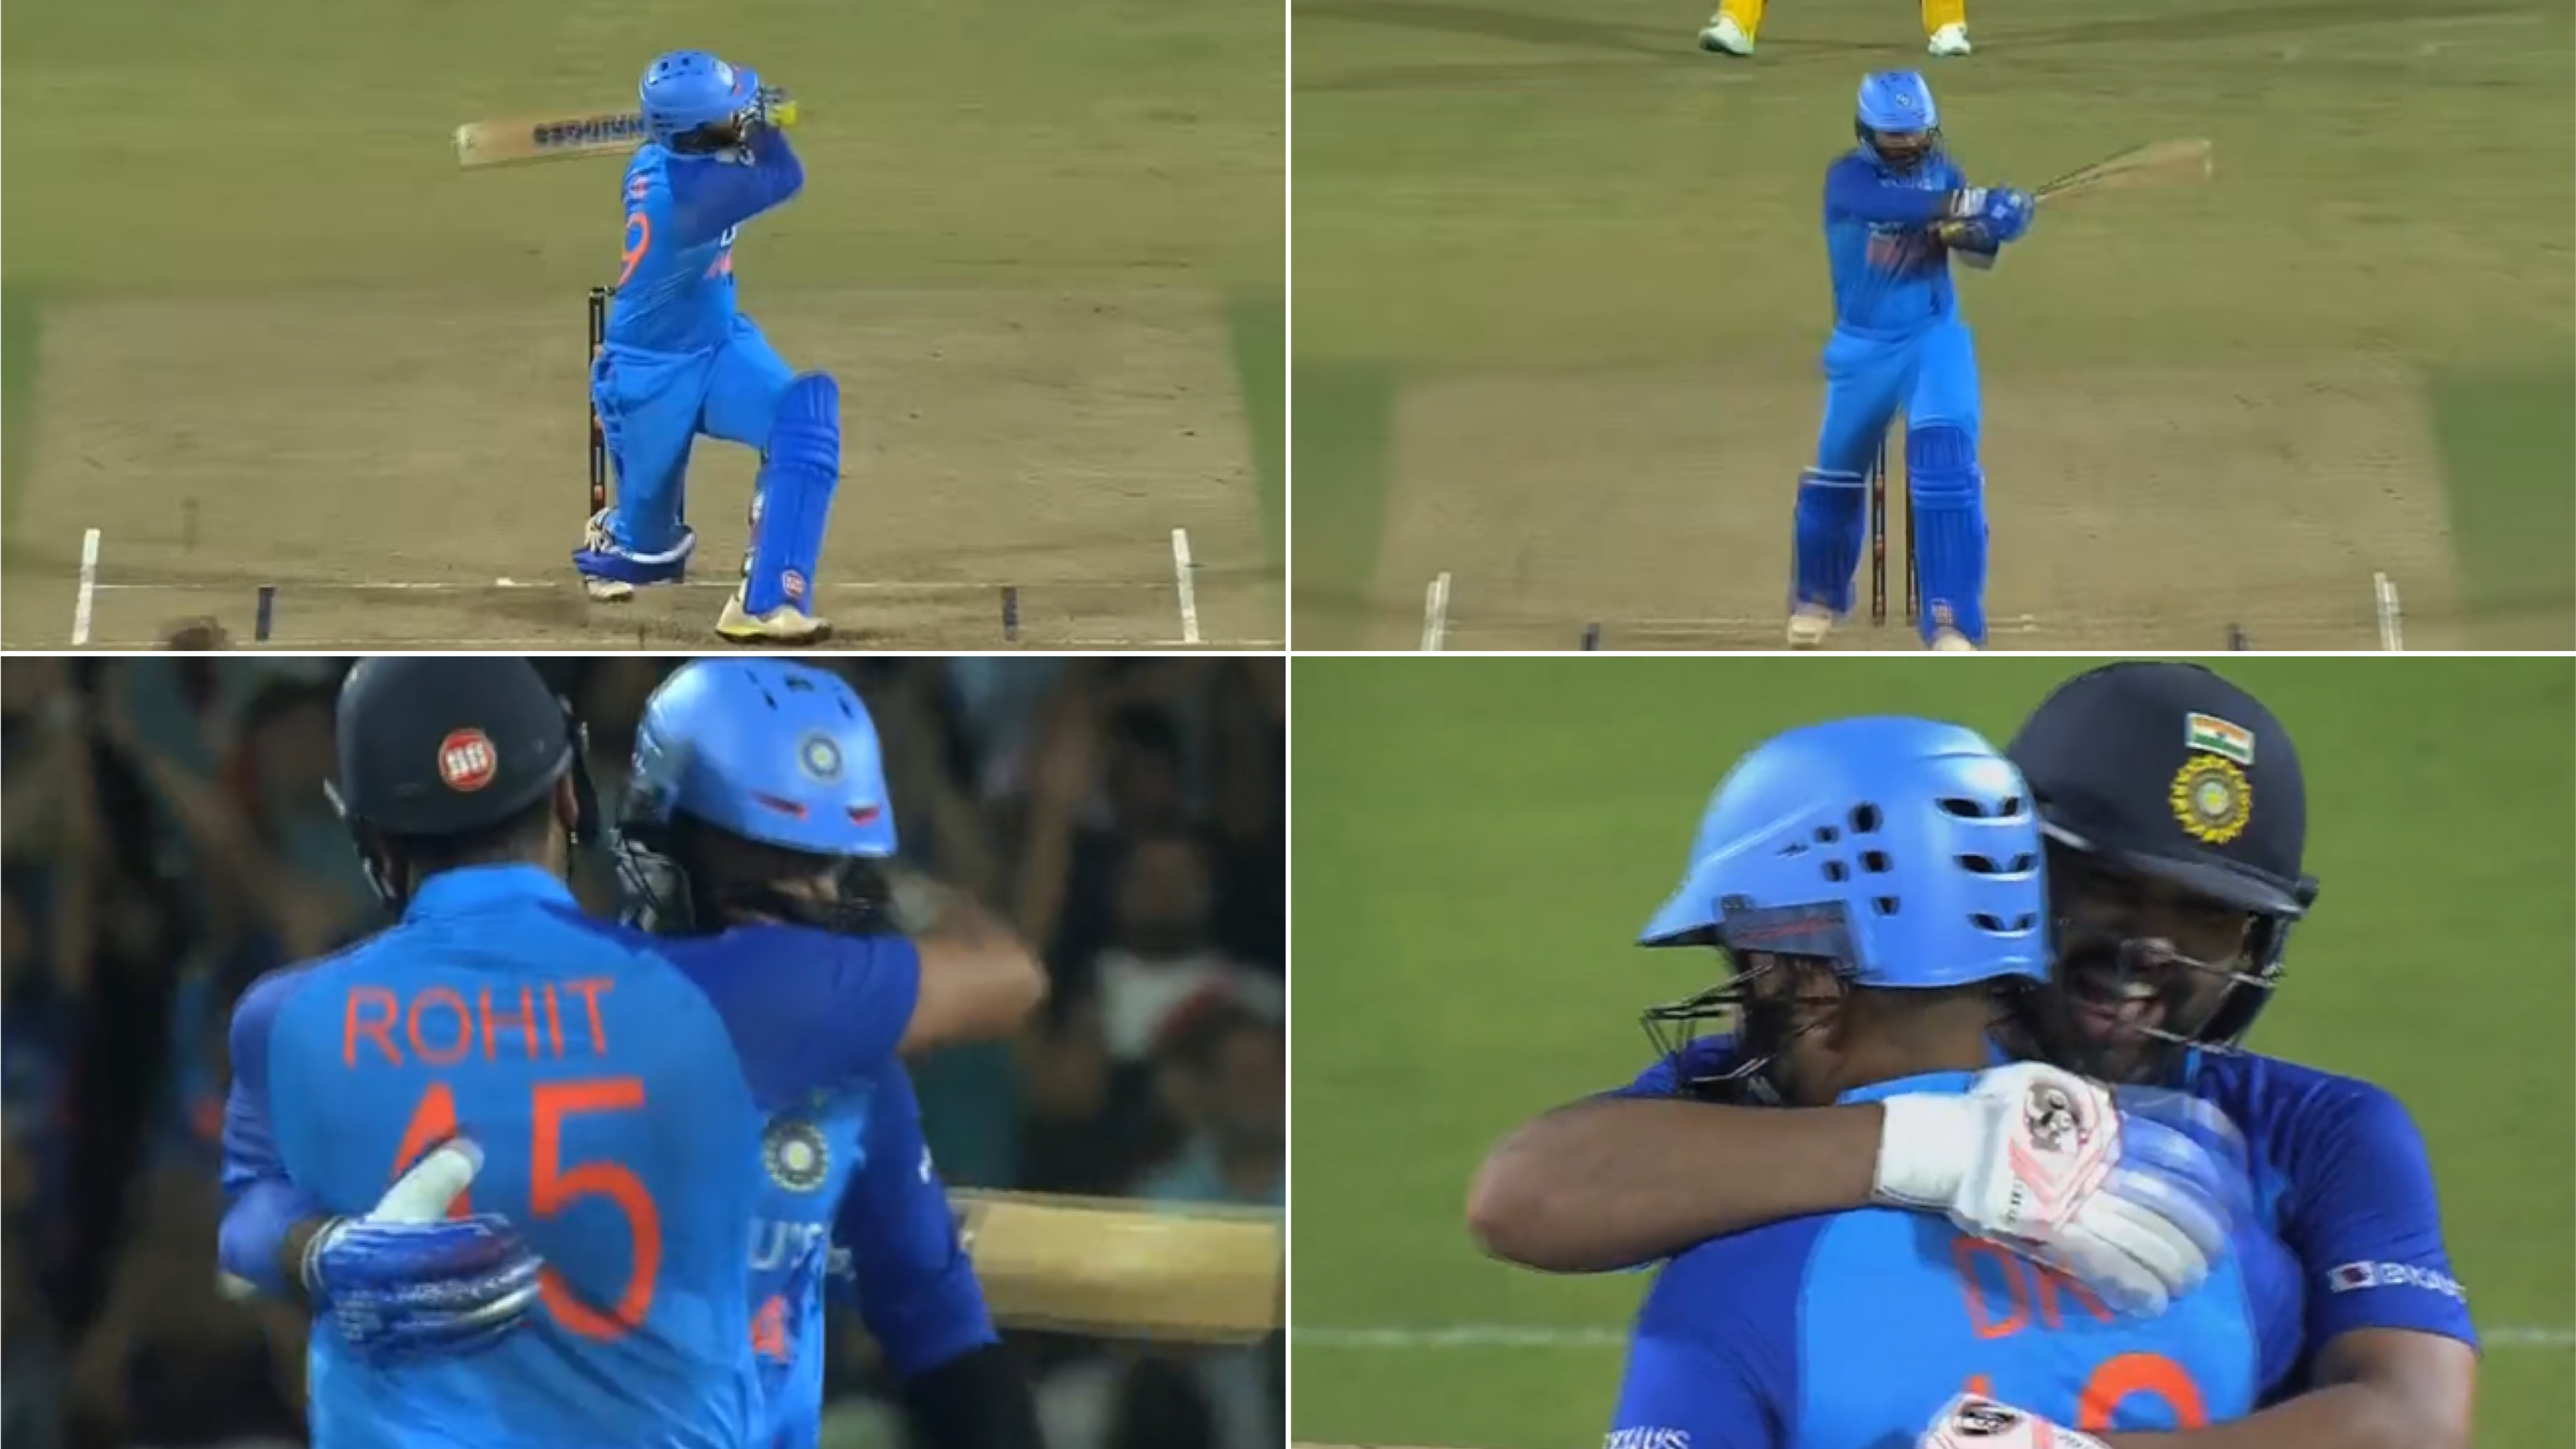 IND v AUS 2022: WATCH - ‘6, 4 and game over’ Dinesh Karthik hugged by Rohit Sharma after finishing act